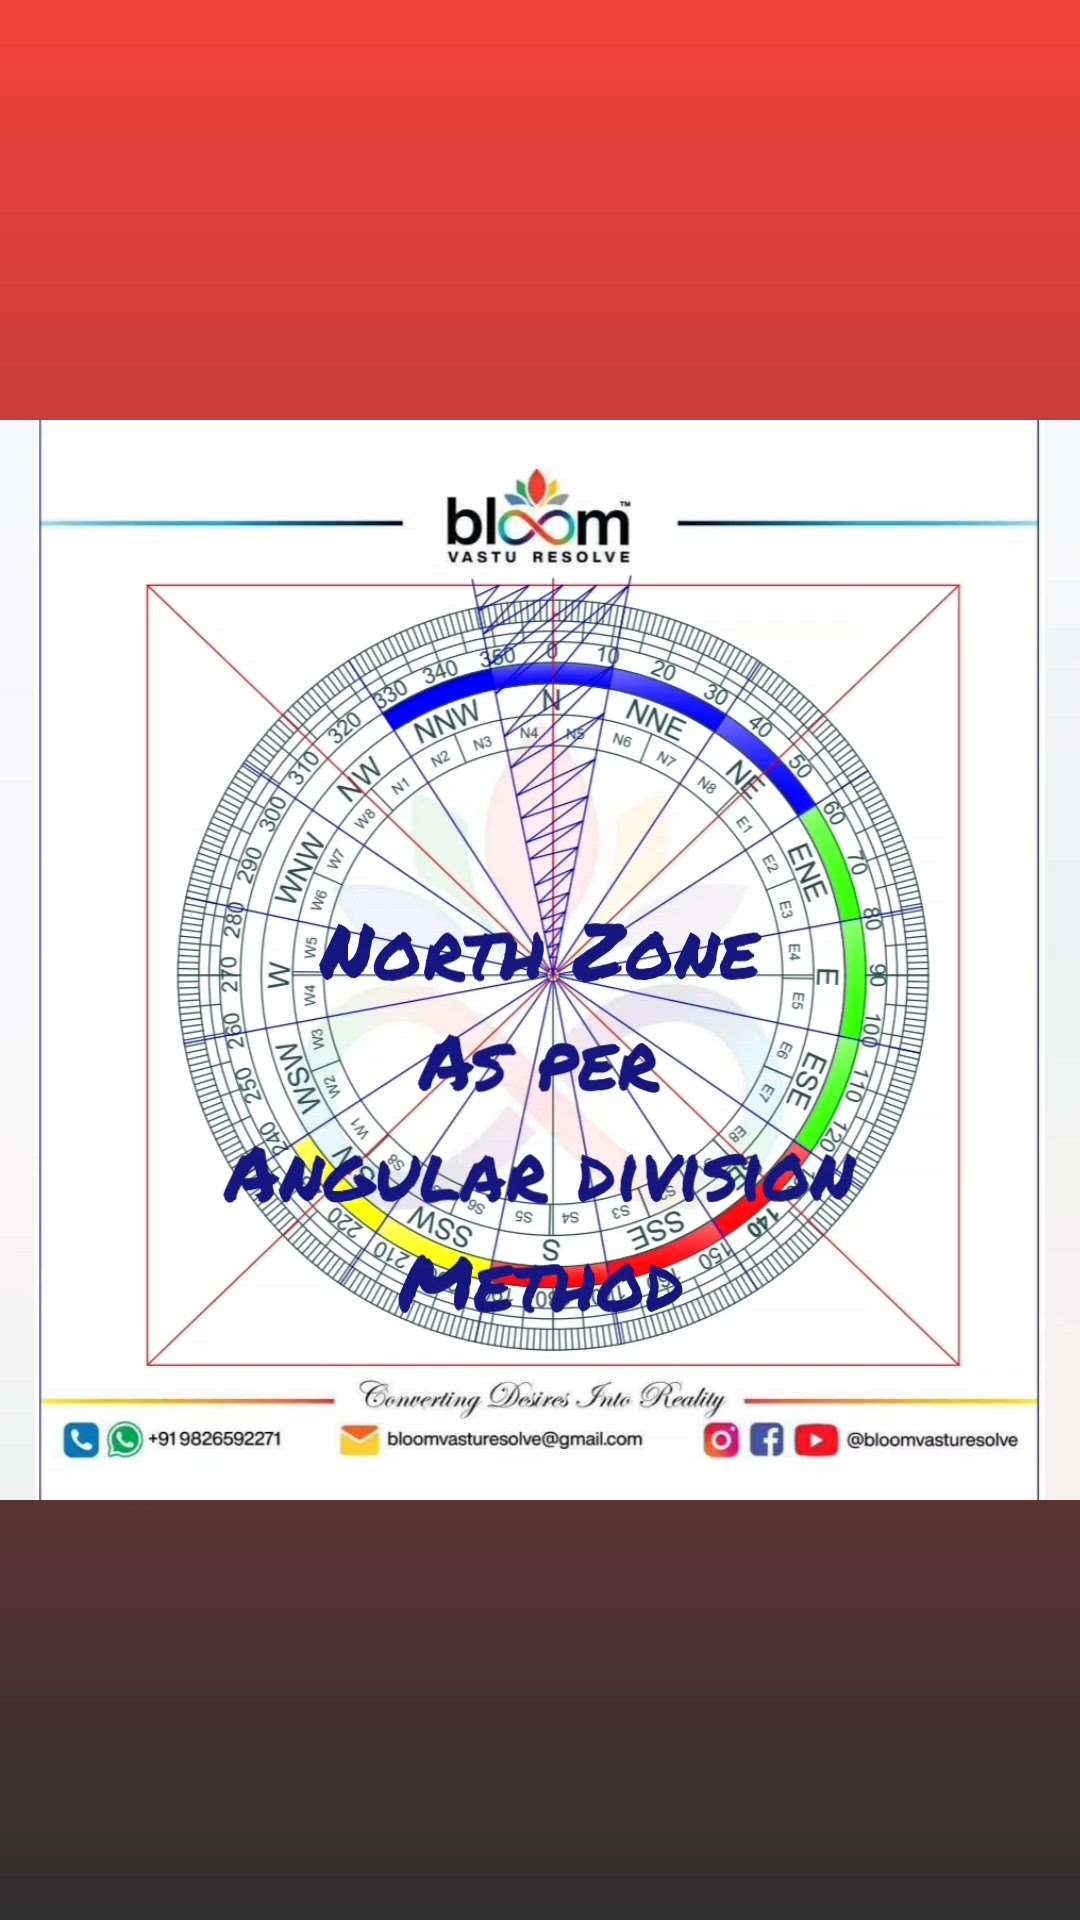 Your queries and comments are always welcome.
For more Vastu please follow @bloomvasturesolve
on YouTube, Instagram & Facebook
.
.
For personal consultation, feel free to contact certified MahaVastu Expert MANISH GUPTA through
M - 9826592271
Or
bloomvasturesolve@gmail.com

#vastu 
#mahavastu 
#mahavastuexpert
#bloomvasturesolve
#NorthZone 
#trending 
#viral